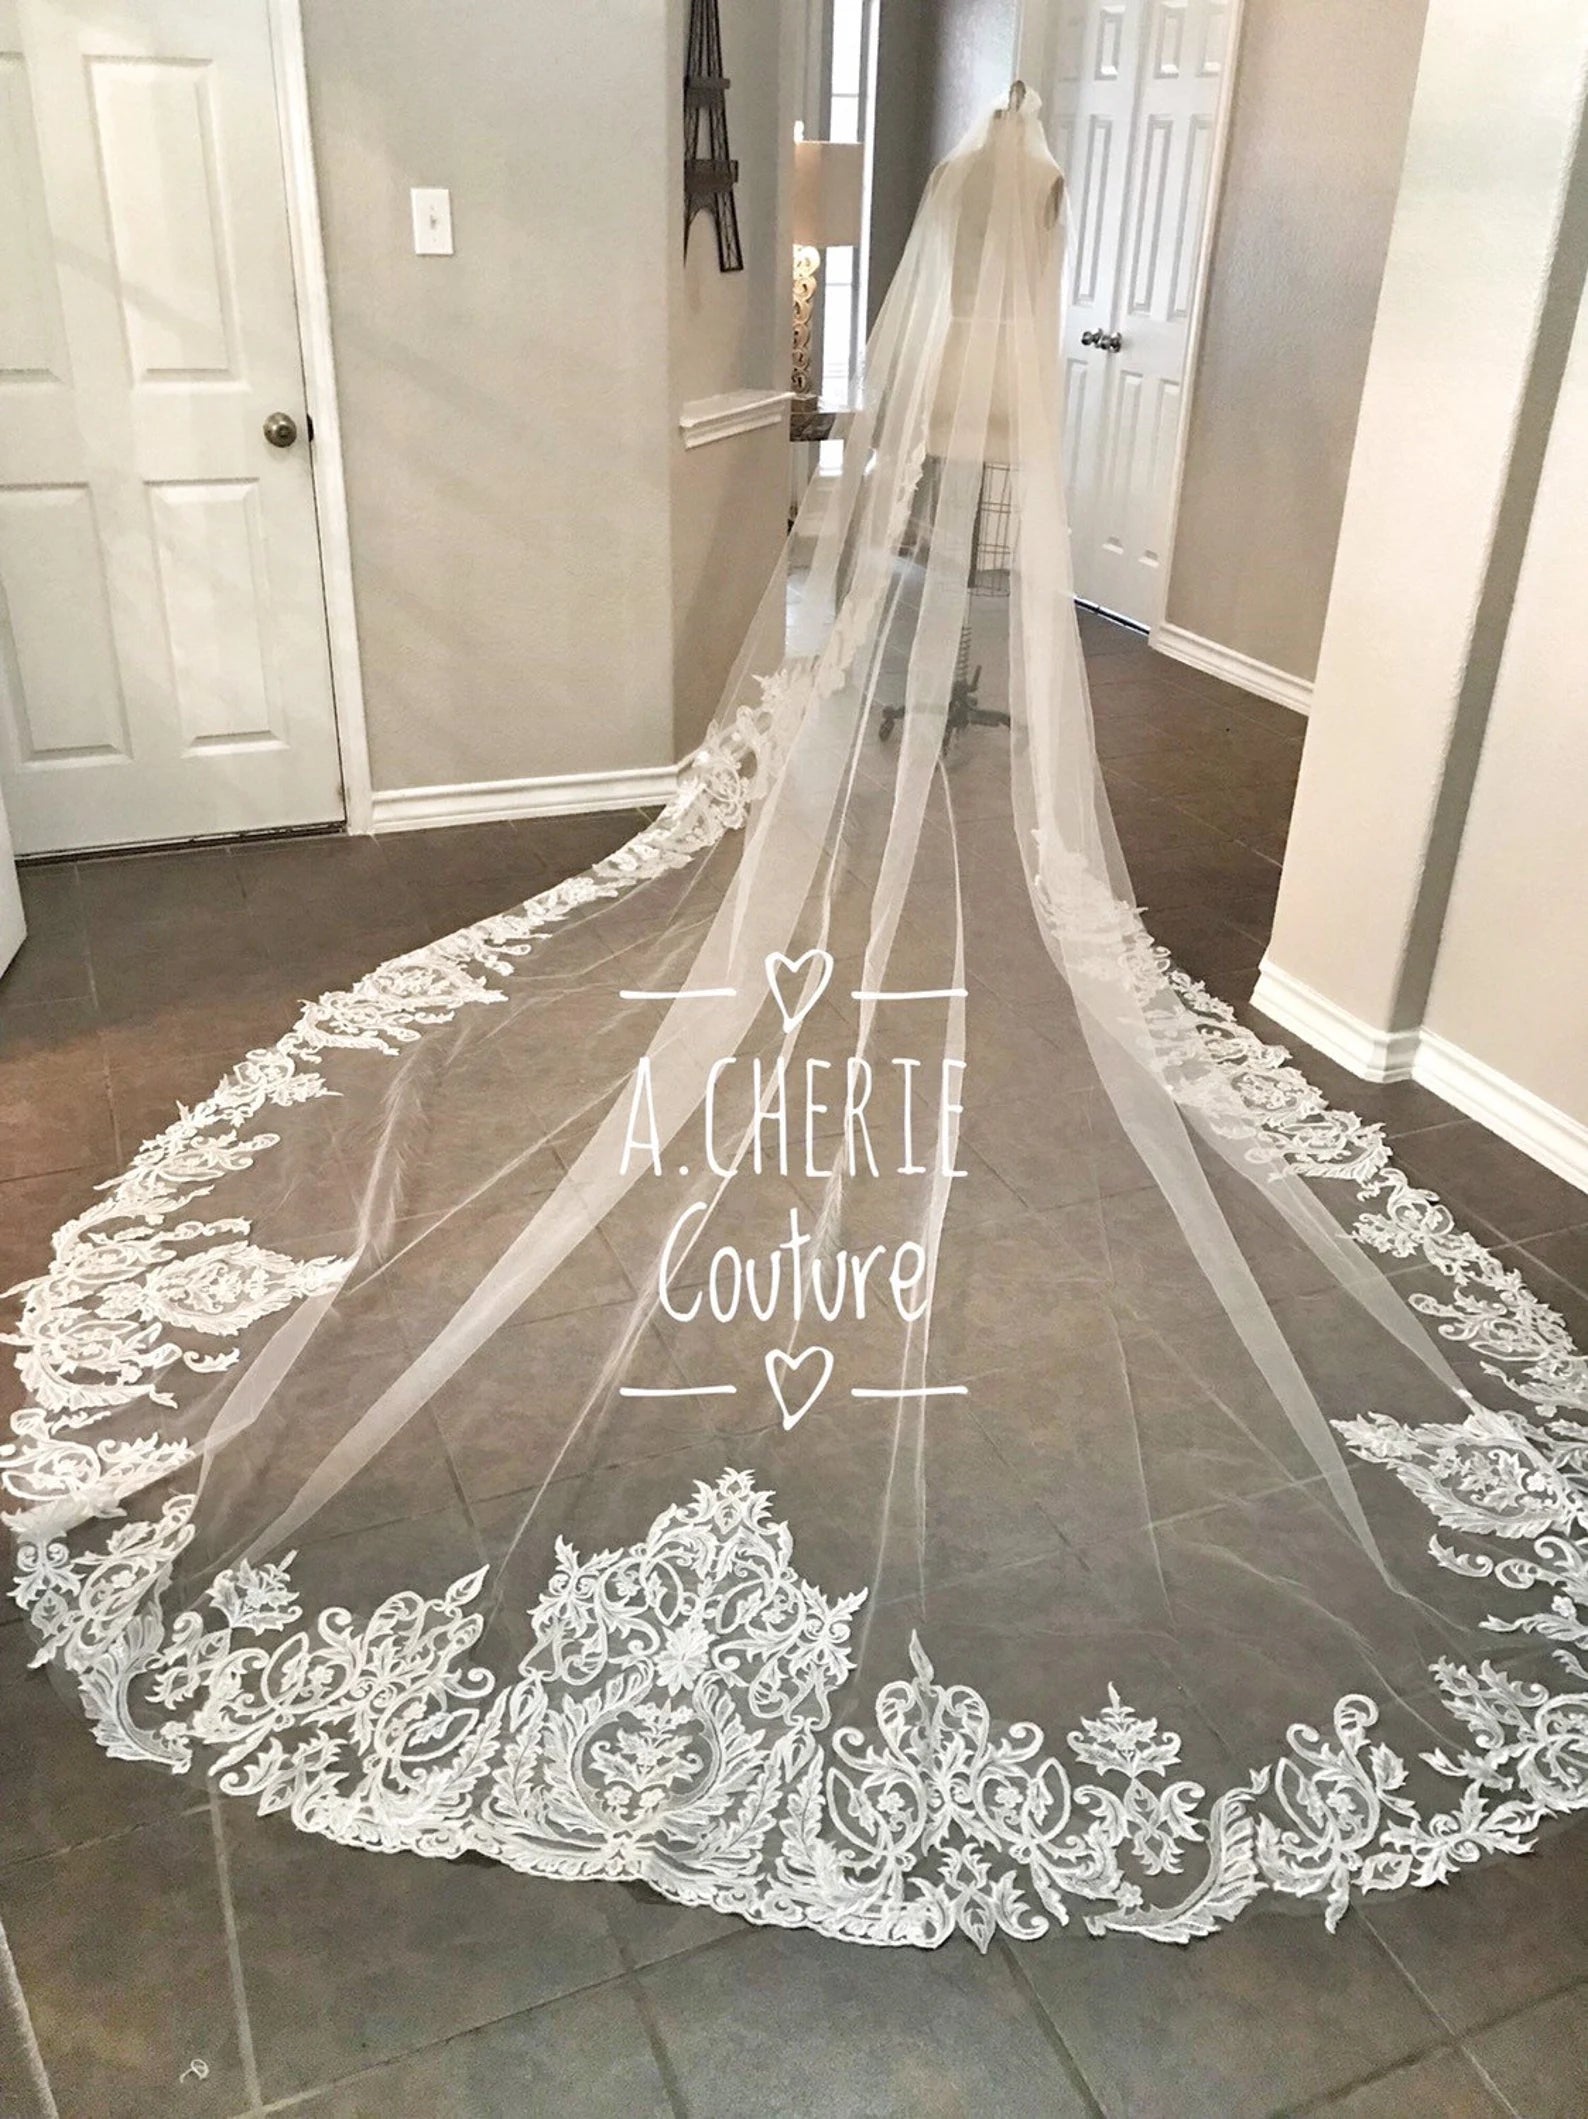 A.Cherie Couture Shop Made to Order Unique Sequin Tinsel Lace Cathedral Veil | Shop A.Cherie Light Ivory / 120 Inches Long (+$20.00 USD)